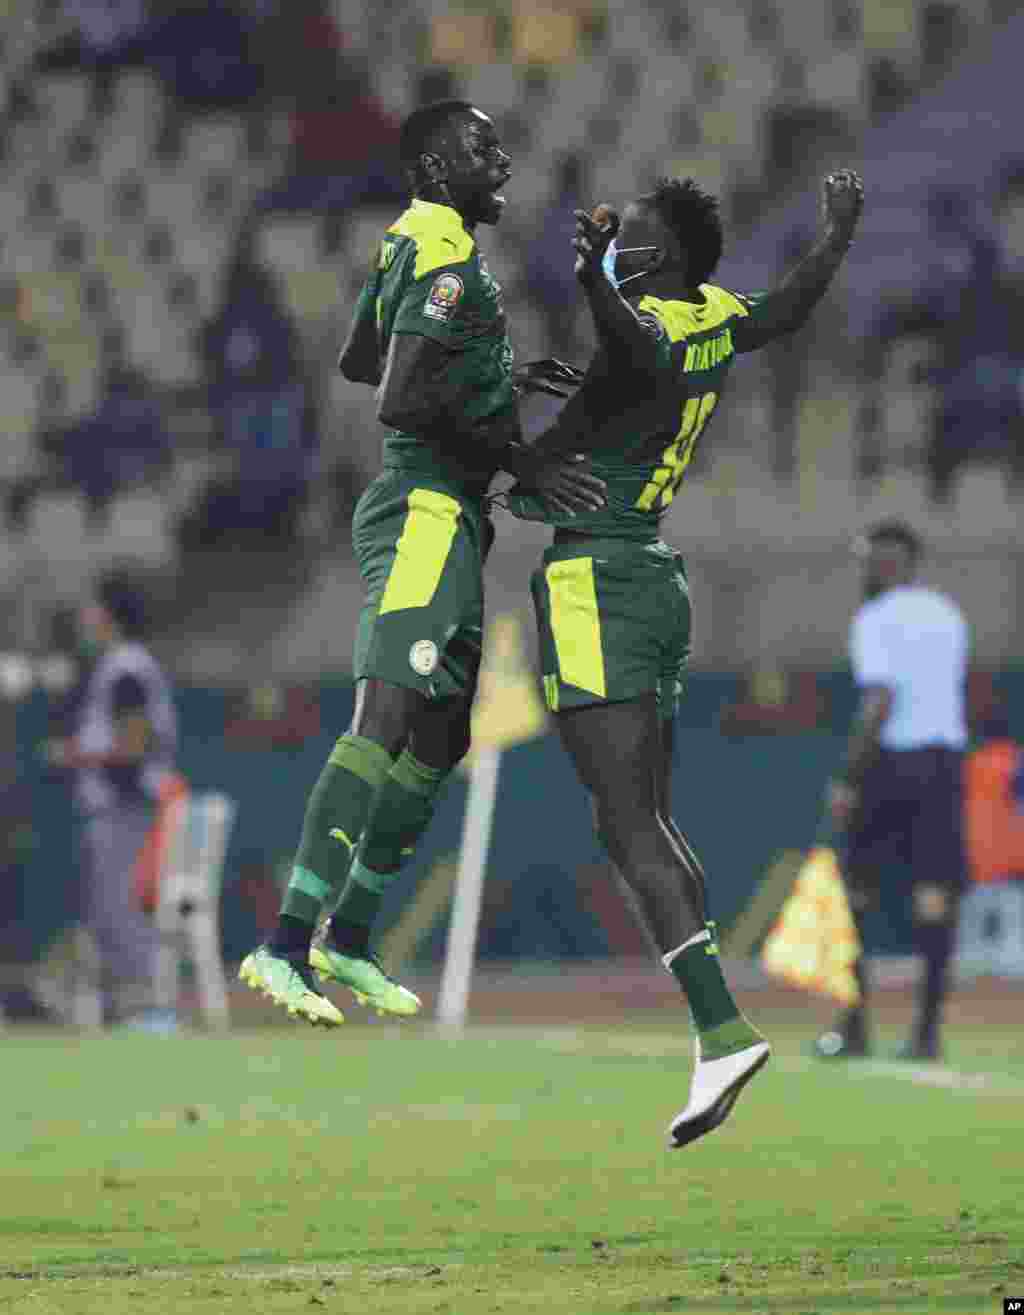 Senegalese teammates celebrate after Kouyate scored a goal against Equatorial Guinea in Cameroon, Jan. 30, 2022.